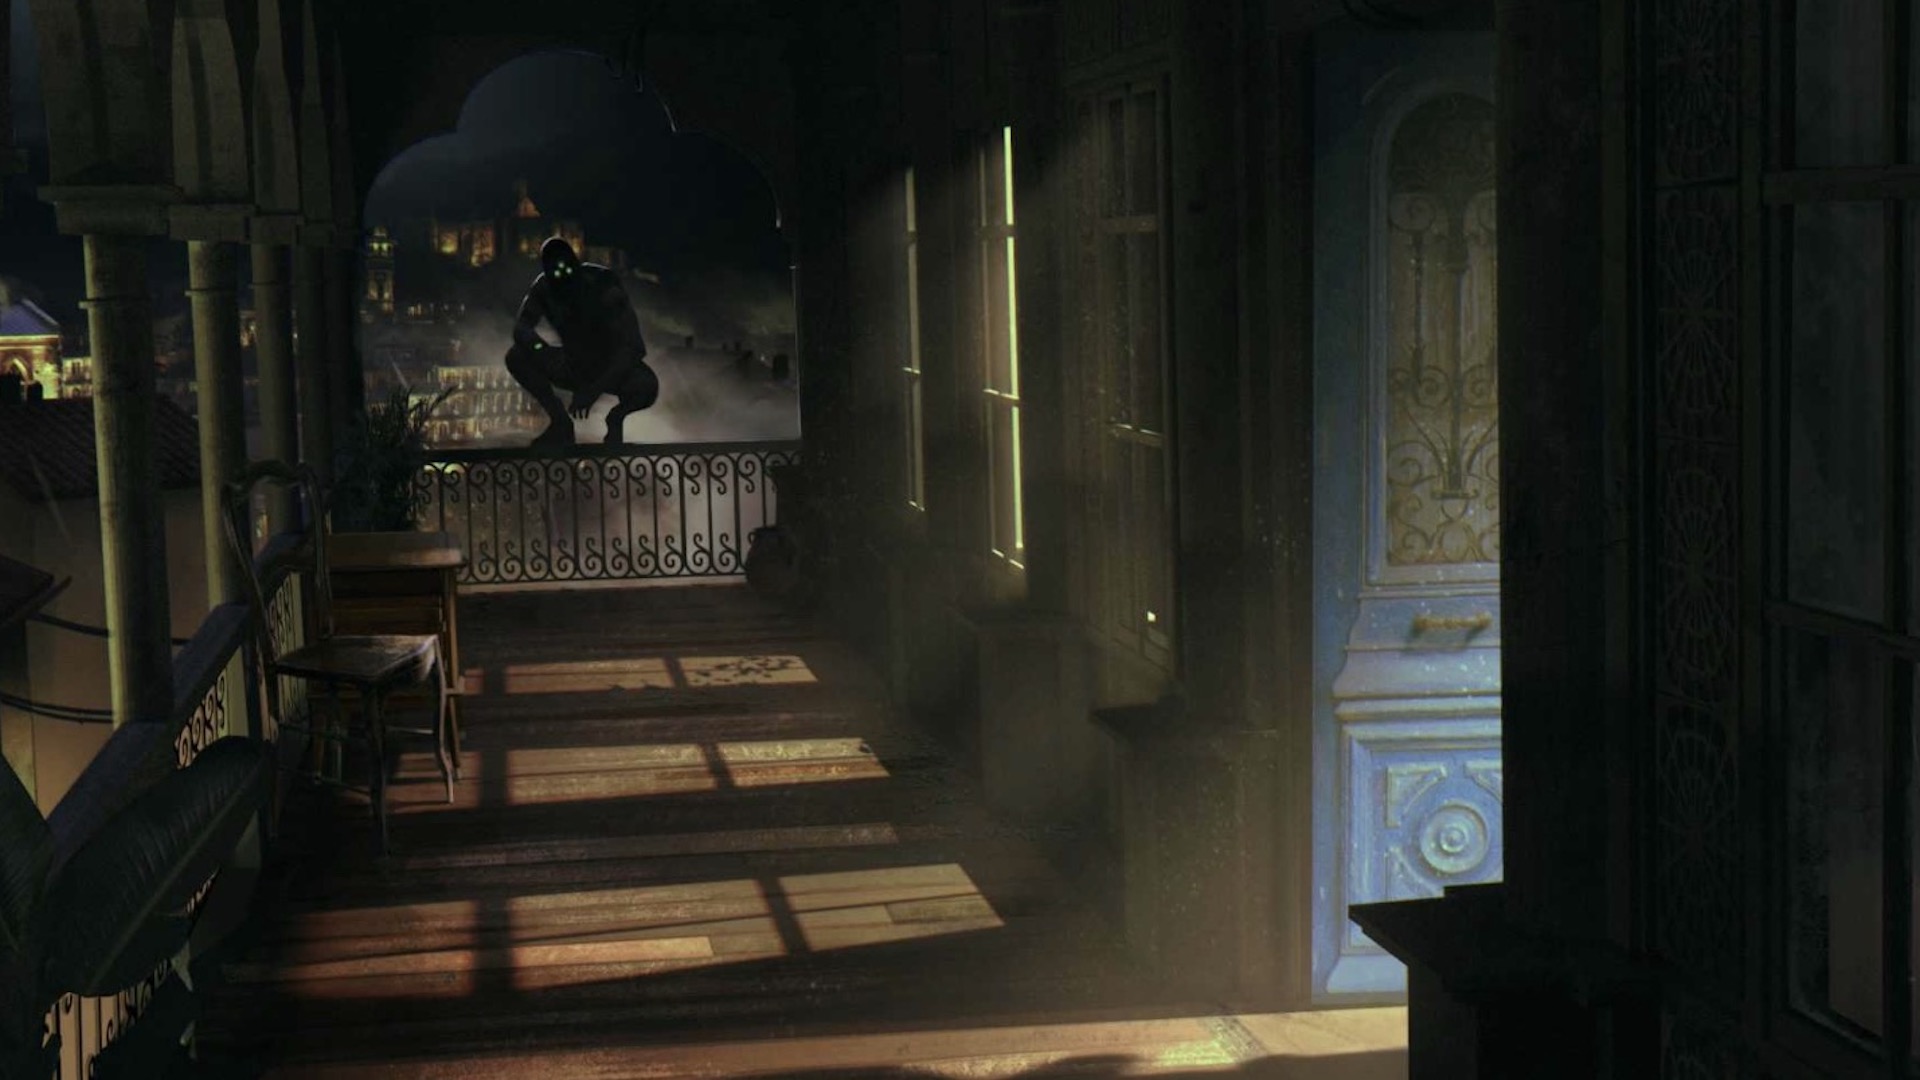 Sam Fisher perched on a railing on a balcony, watching the shadow of a person standing inside